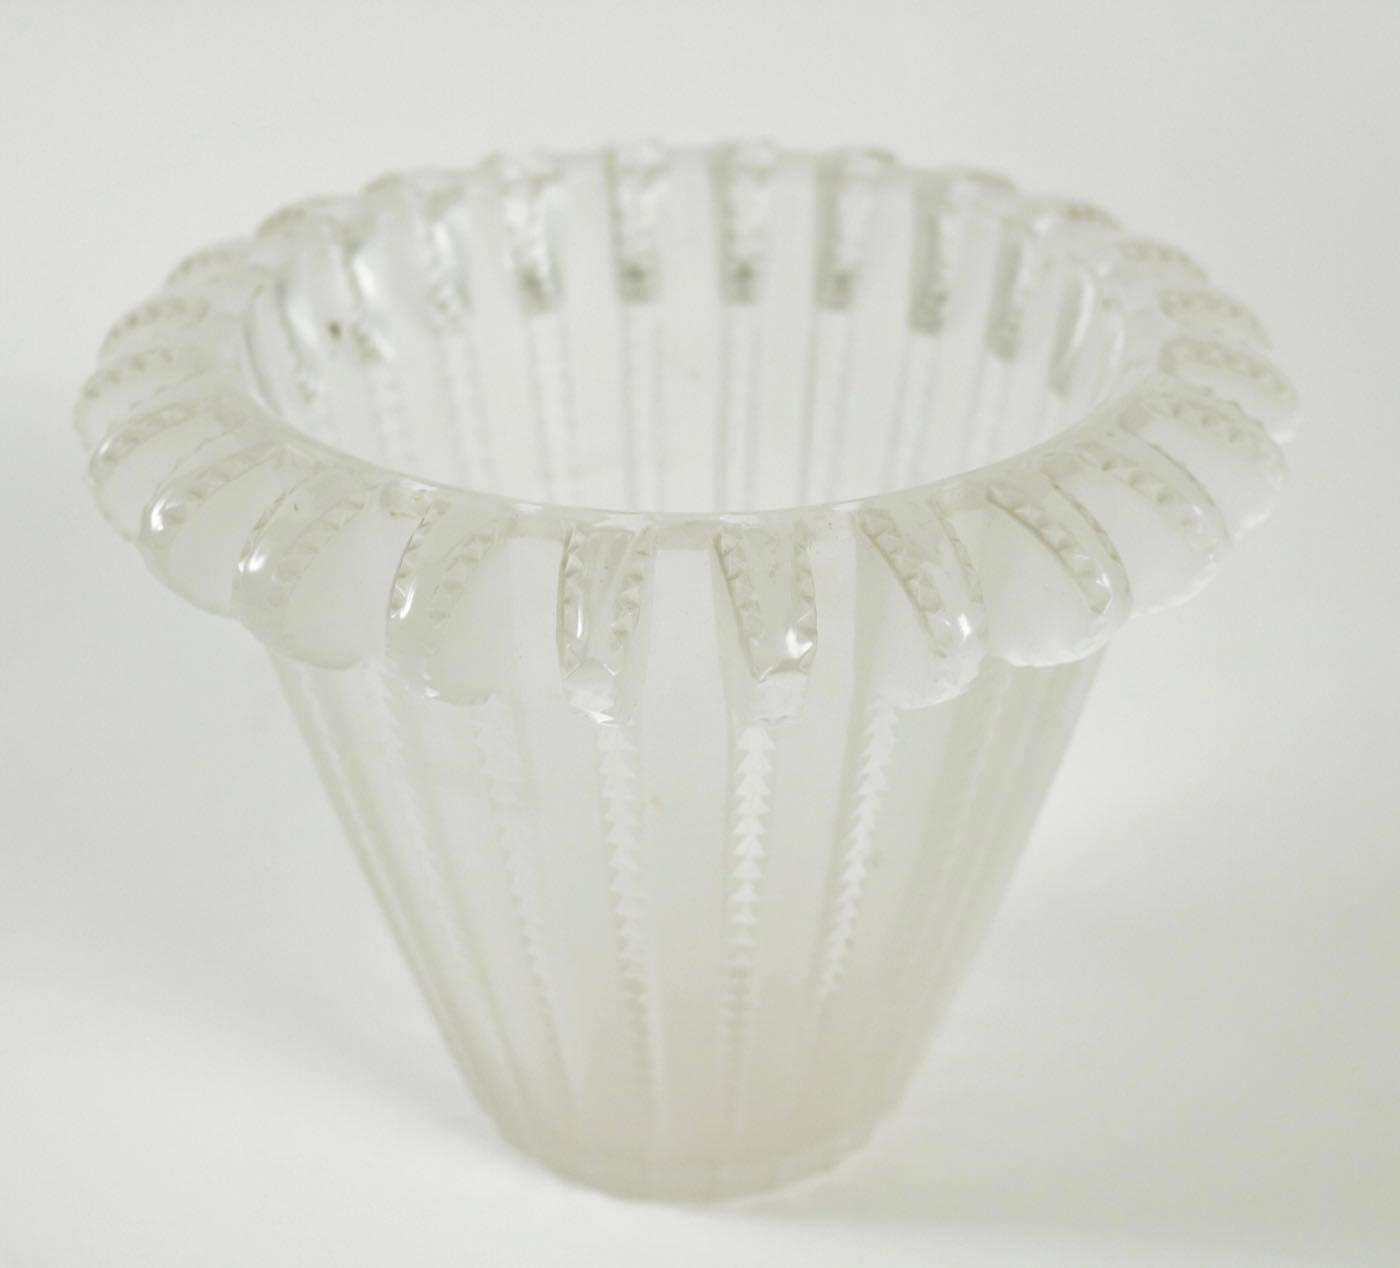 Royat, model created on April 28, 1936 vase molded glass pressed and, largely, satin. Signed R. Lalique France in relief under the base. Measure: Height 15.5 cm Bibliography: 